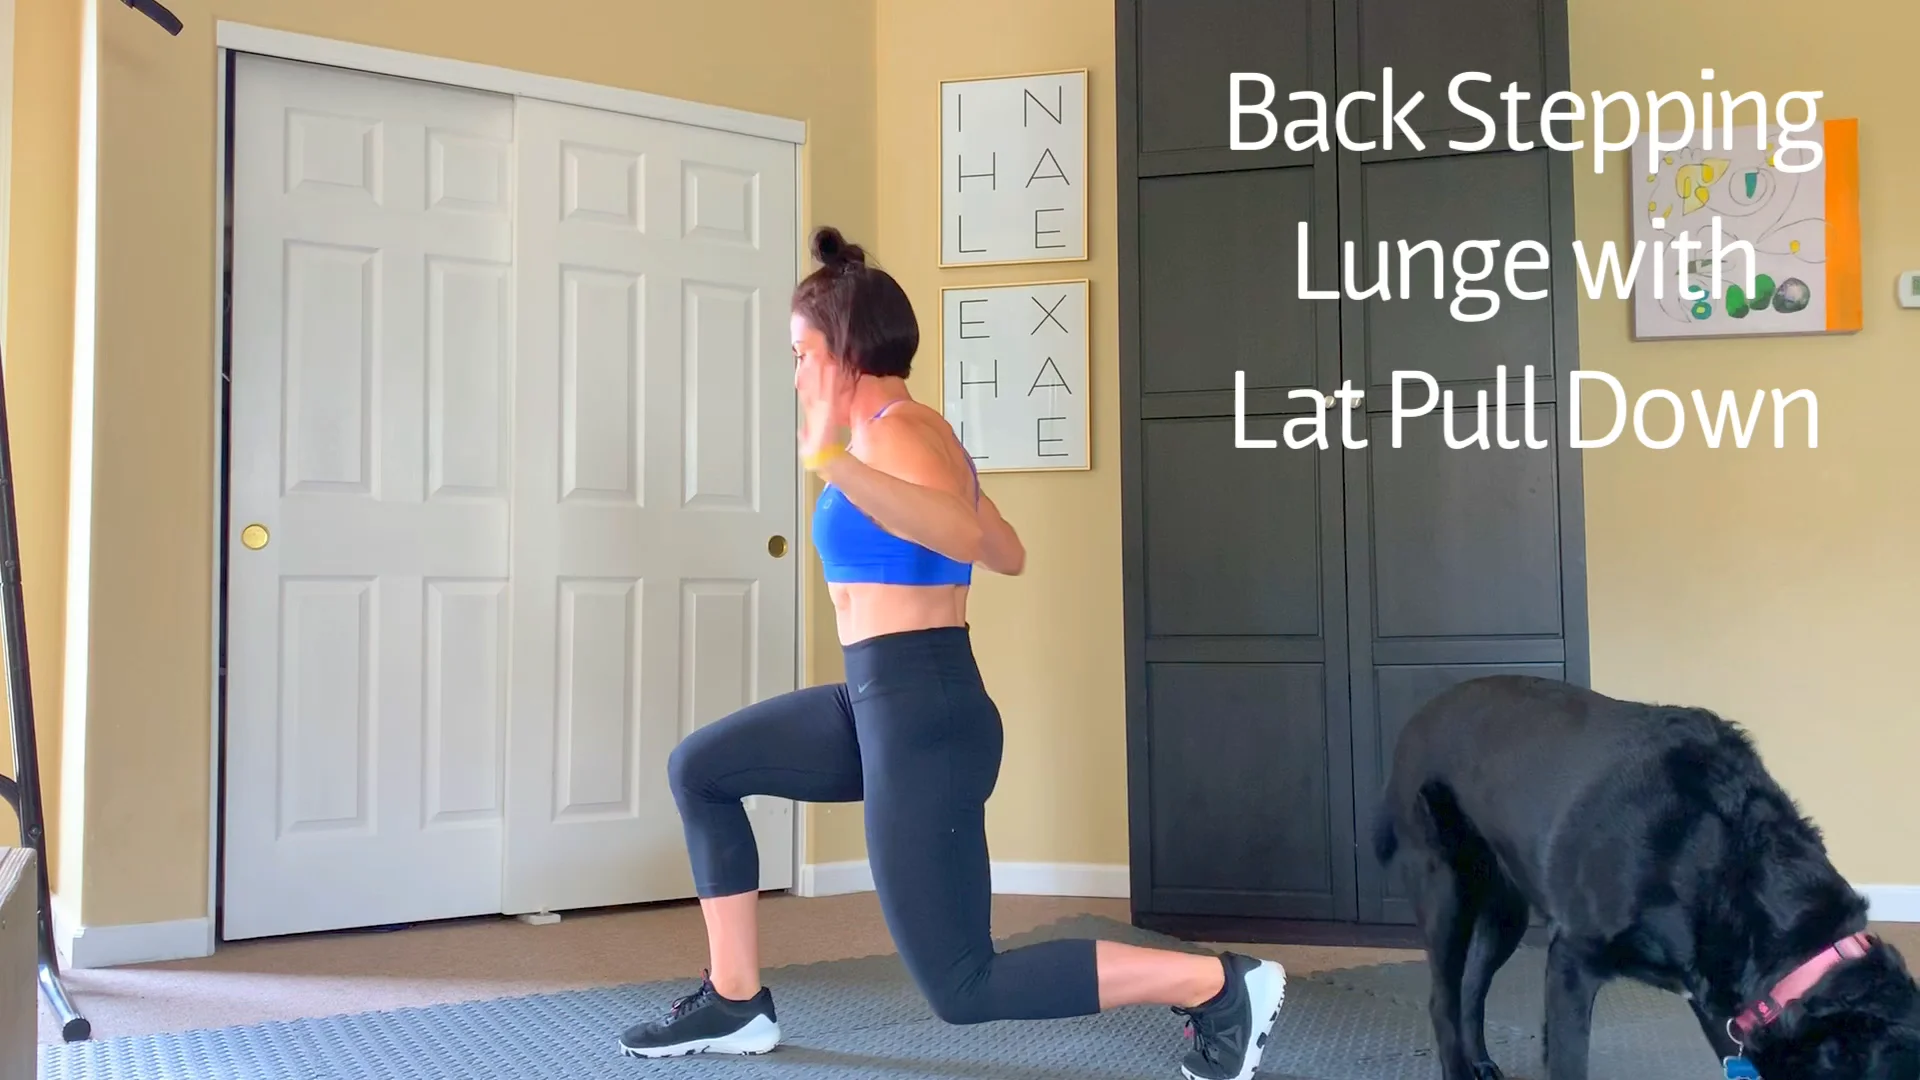 Back Stepping Lunge with Lat Pull Down on Vimeo